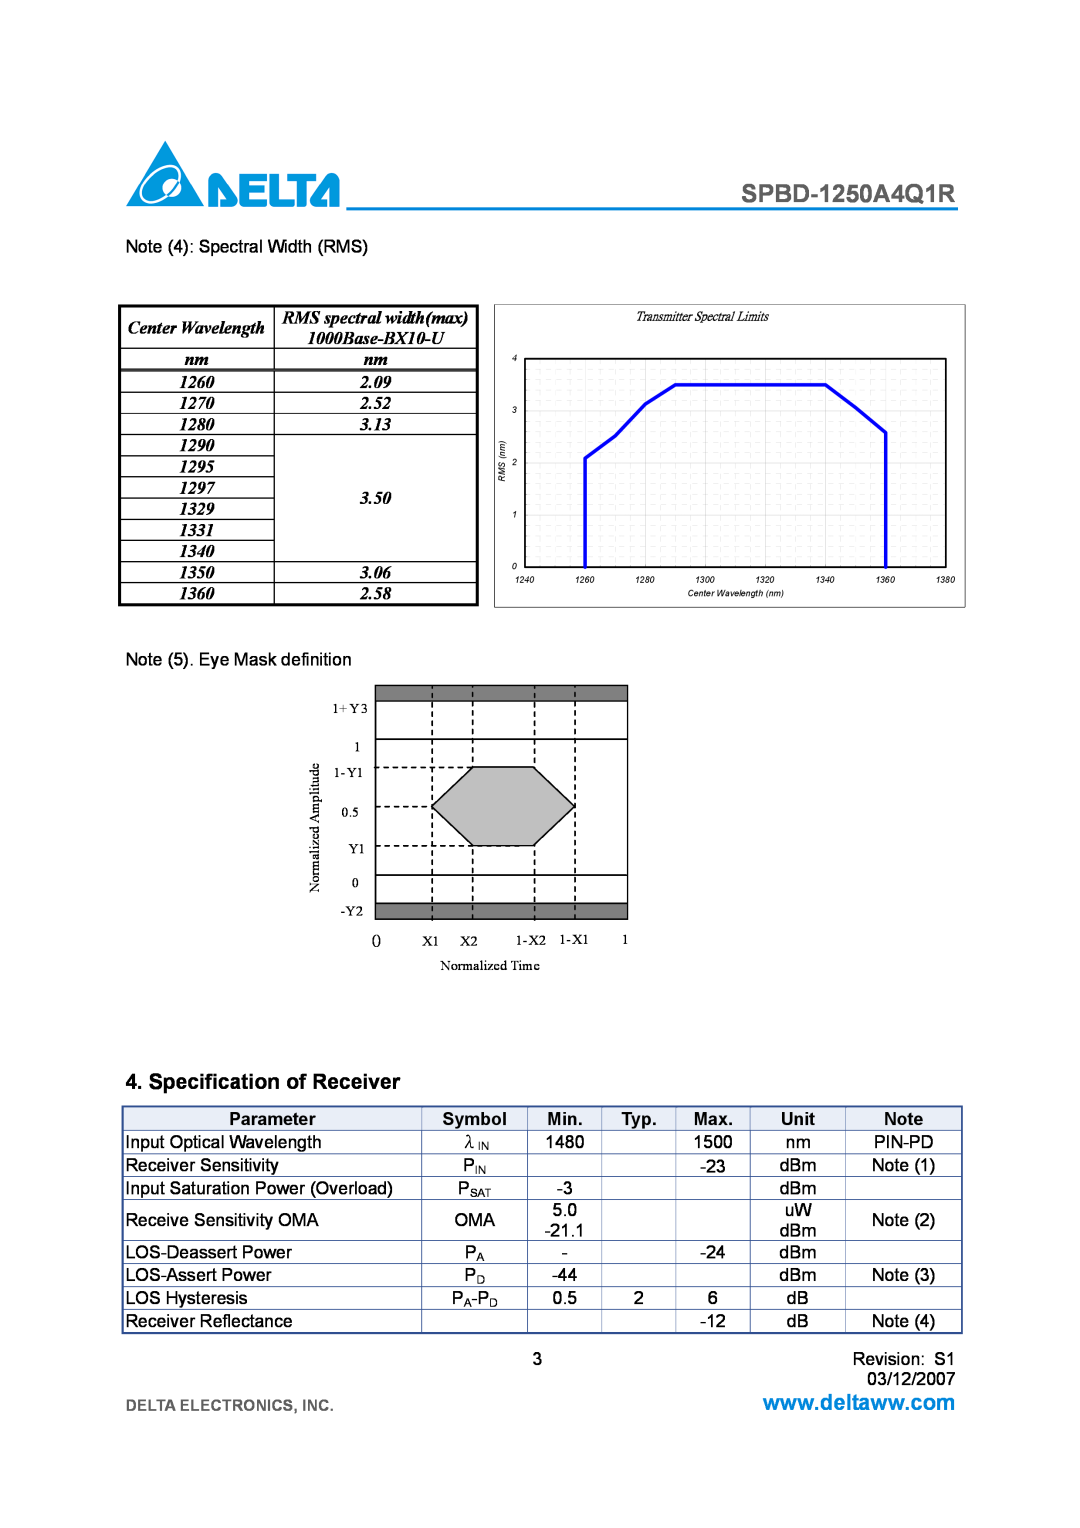 Delta Electronics SPBD-1250A4Q1R Specification of Receiver, Center Wavelength, RMS spectral widthmax, Parameter, Symbol 